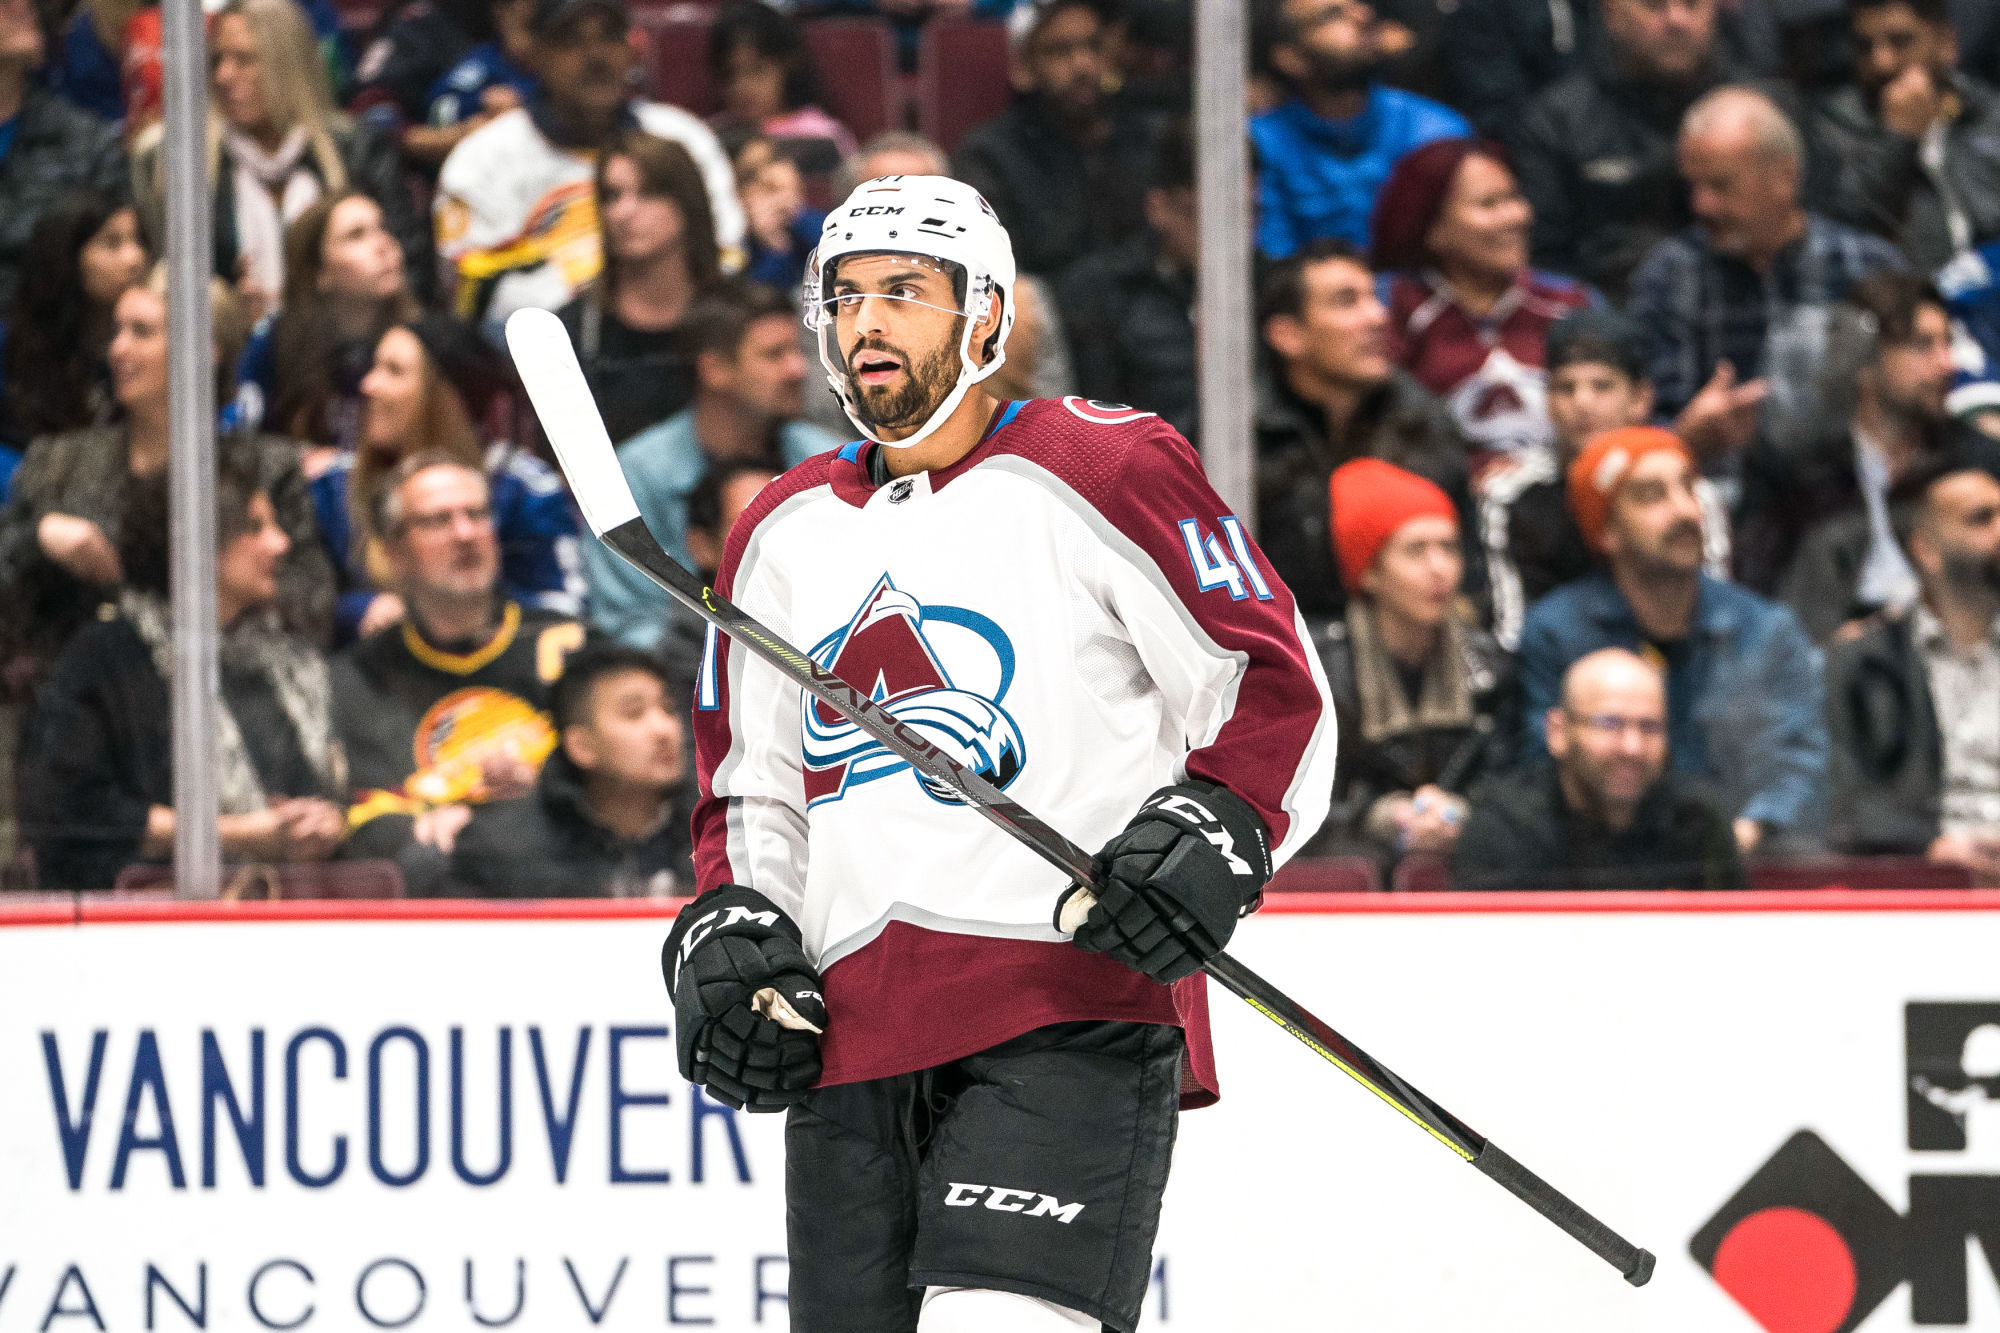 Colorado Avalanche-Pierre-Edouard Bellemare  
Photo by Icon Sport